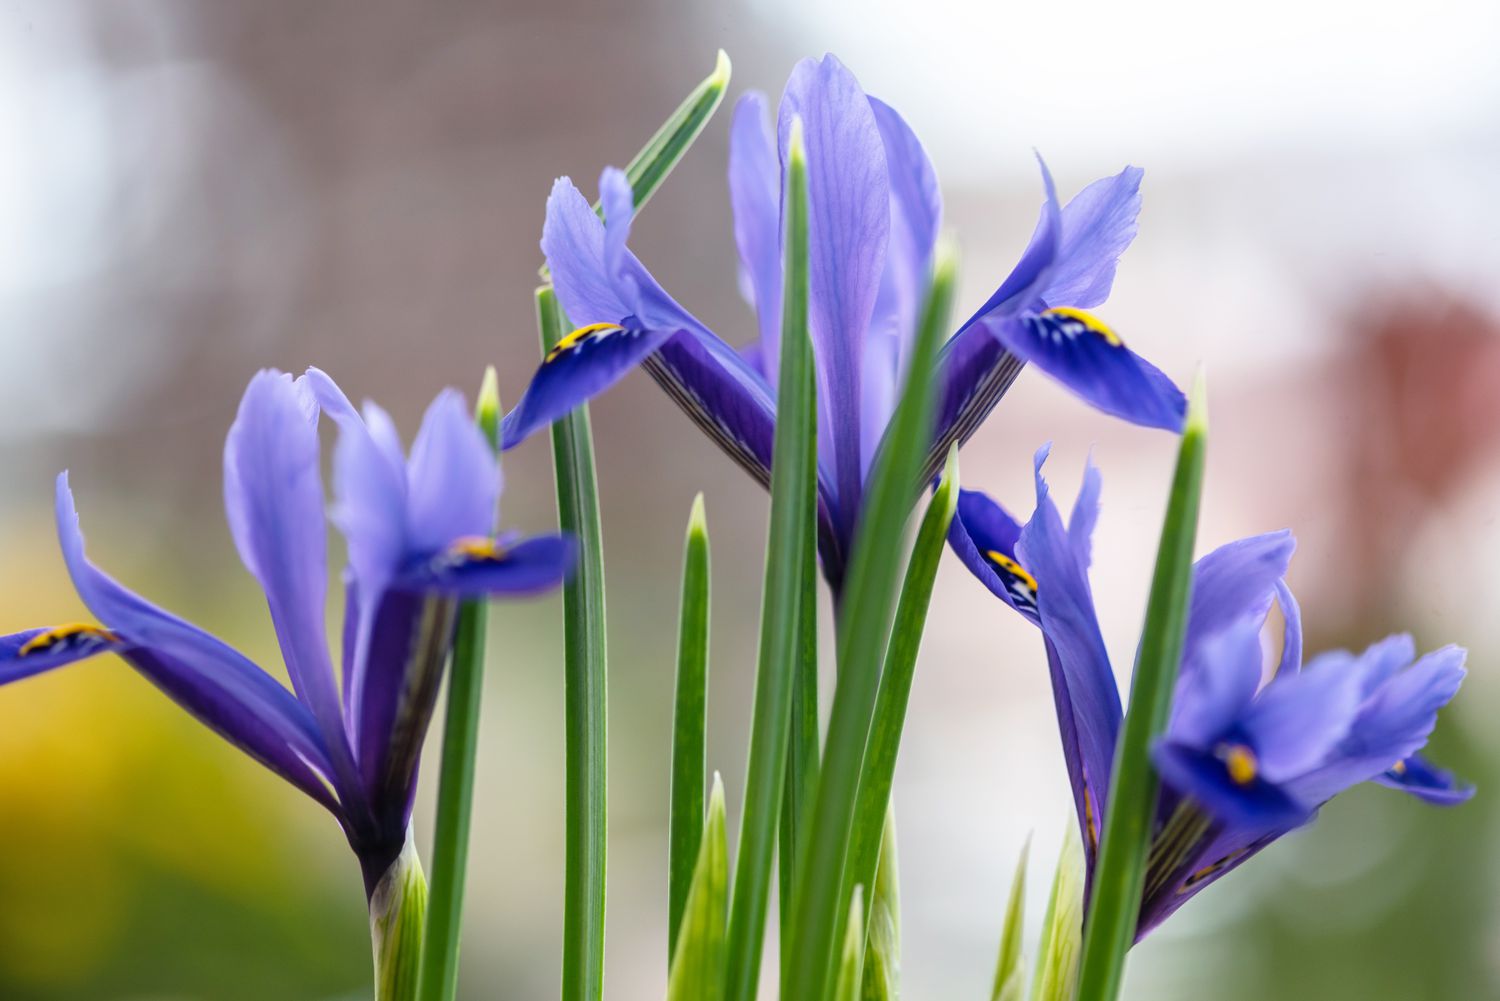 Iris reticulata with purple and yellow flowers with slender leaves closeup